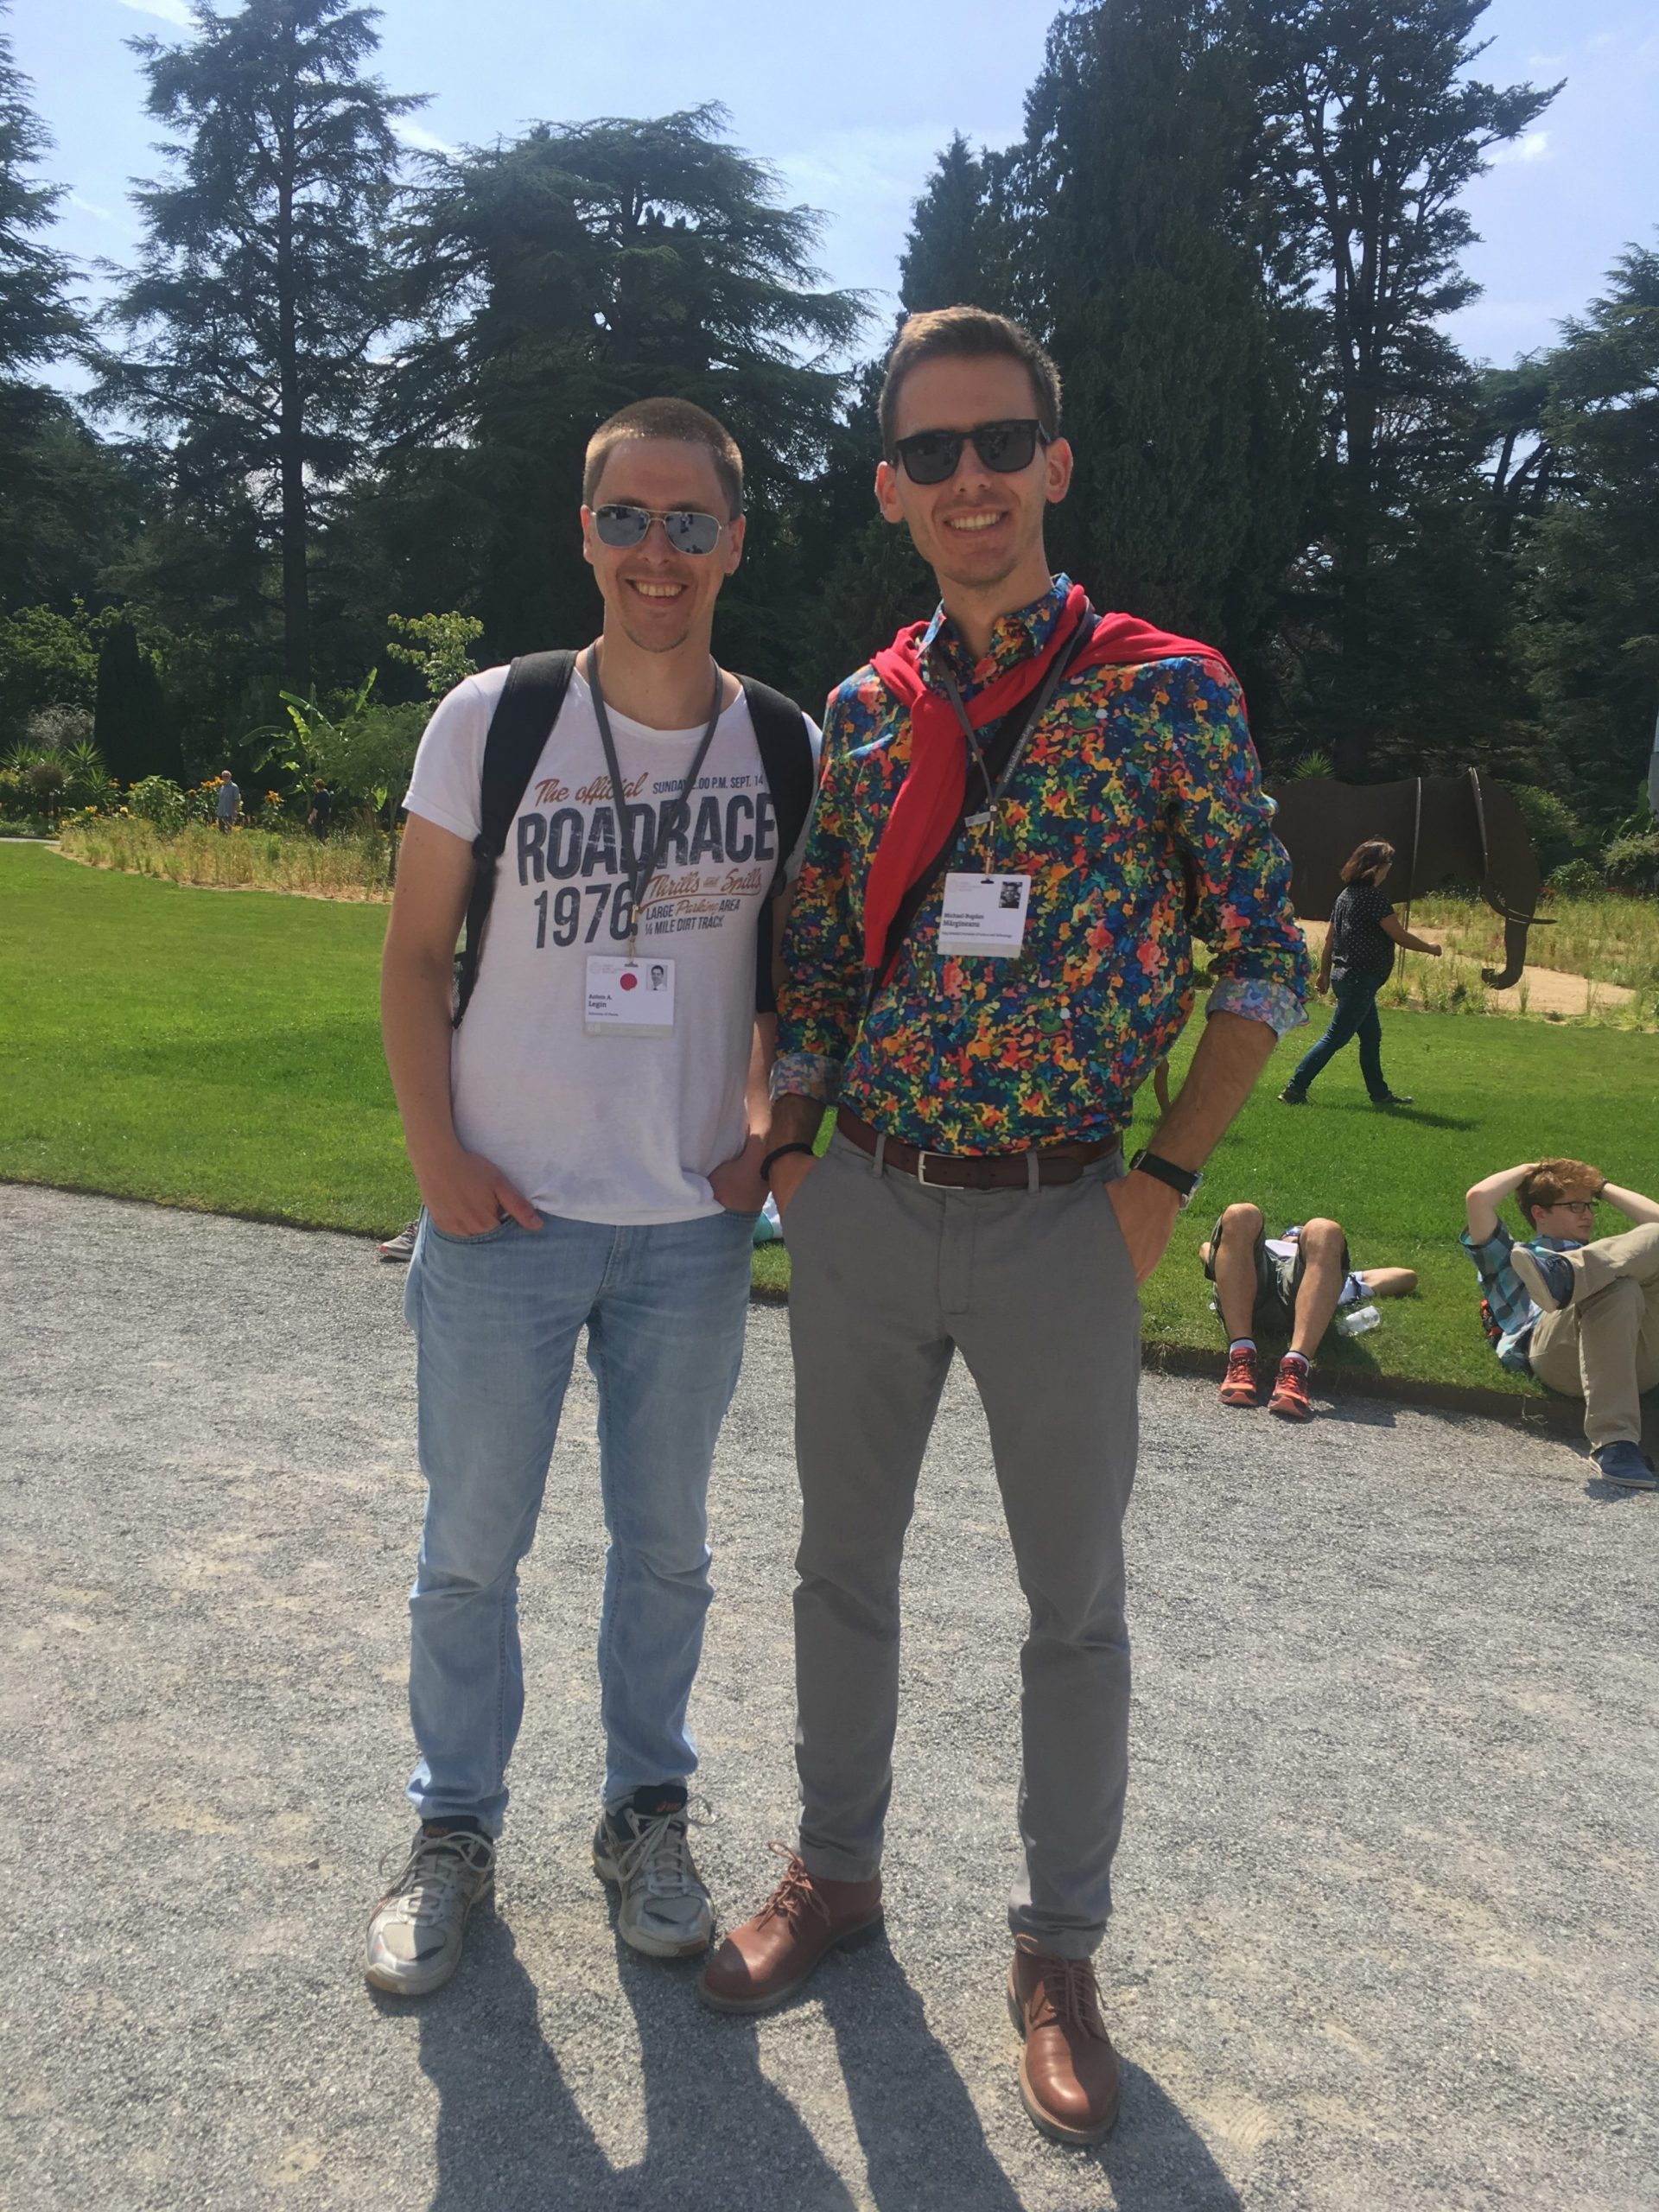 Anton and Michael, currently working at the University of Vienna and the KAUST Saudi Arabia just met a few days ago. Apart from their research on age-related diseases and brain metabolism, Anton told us he likes dragon-boat-races and Michael, who‘s originally from Romania, enjoys water sports as well: 